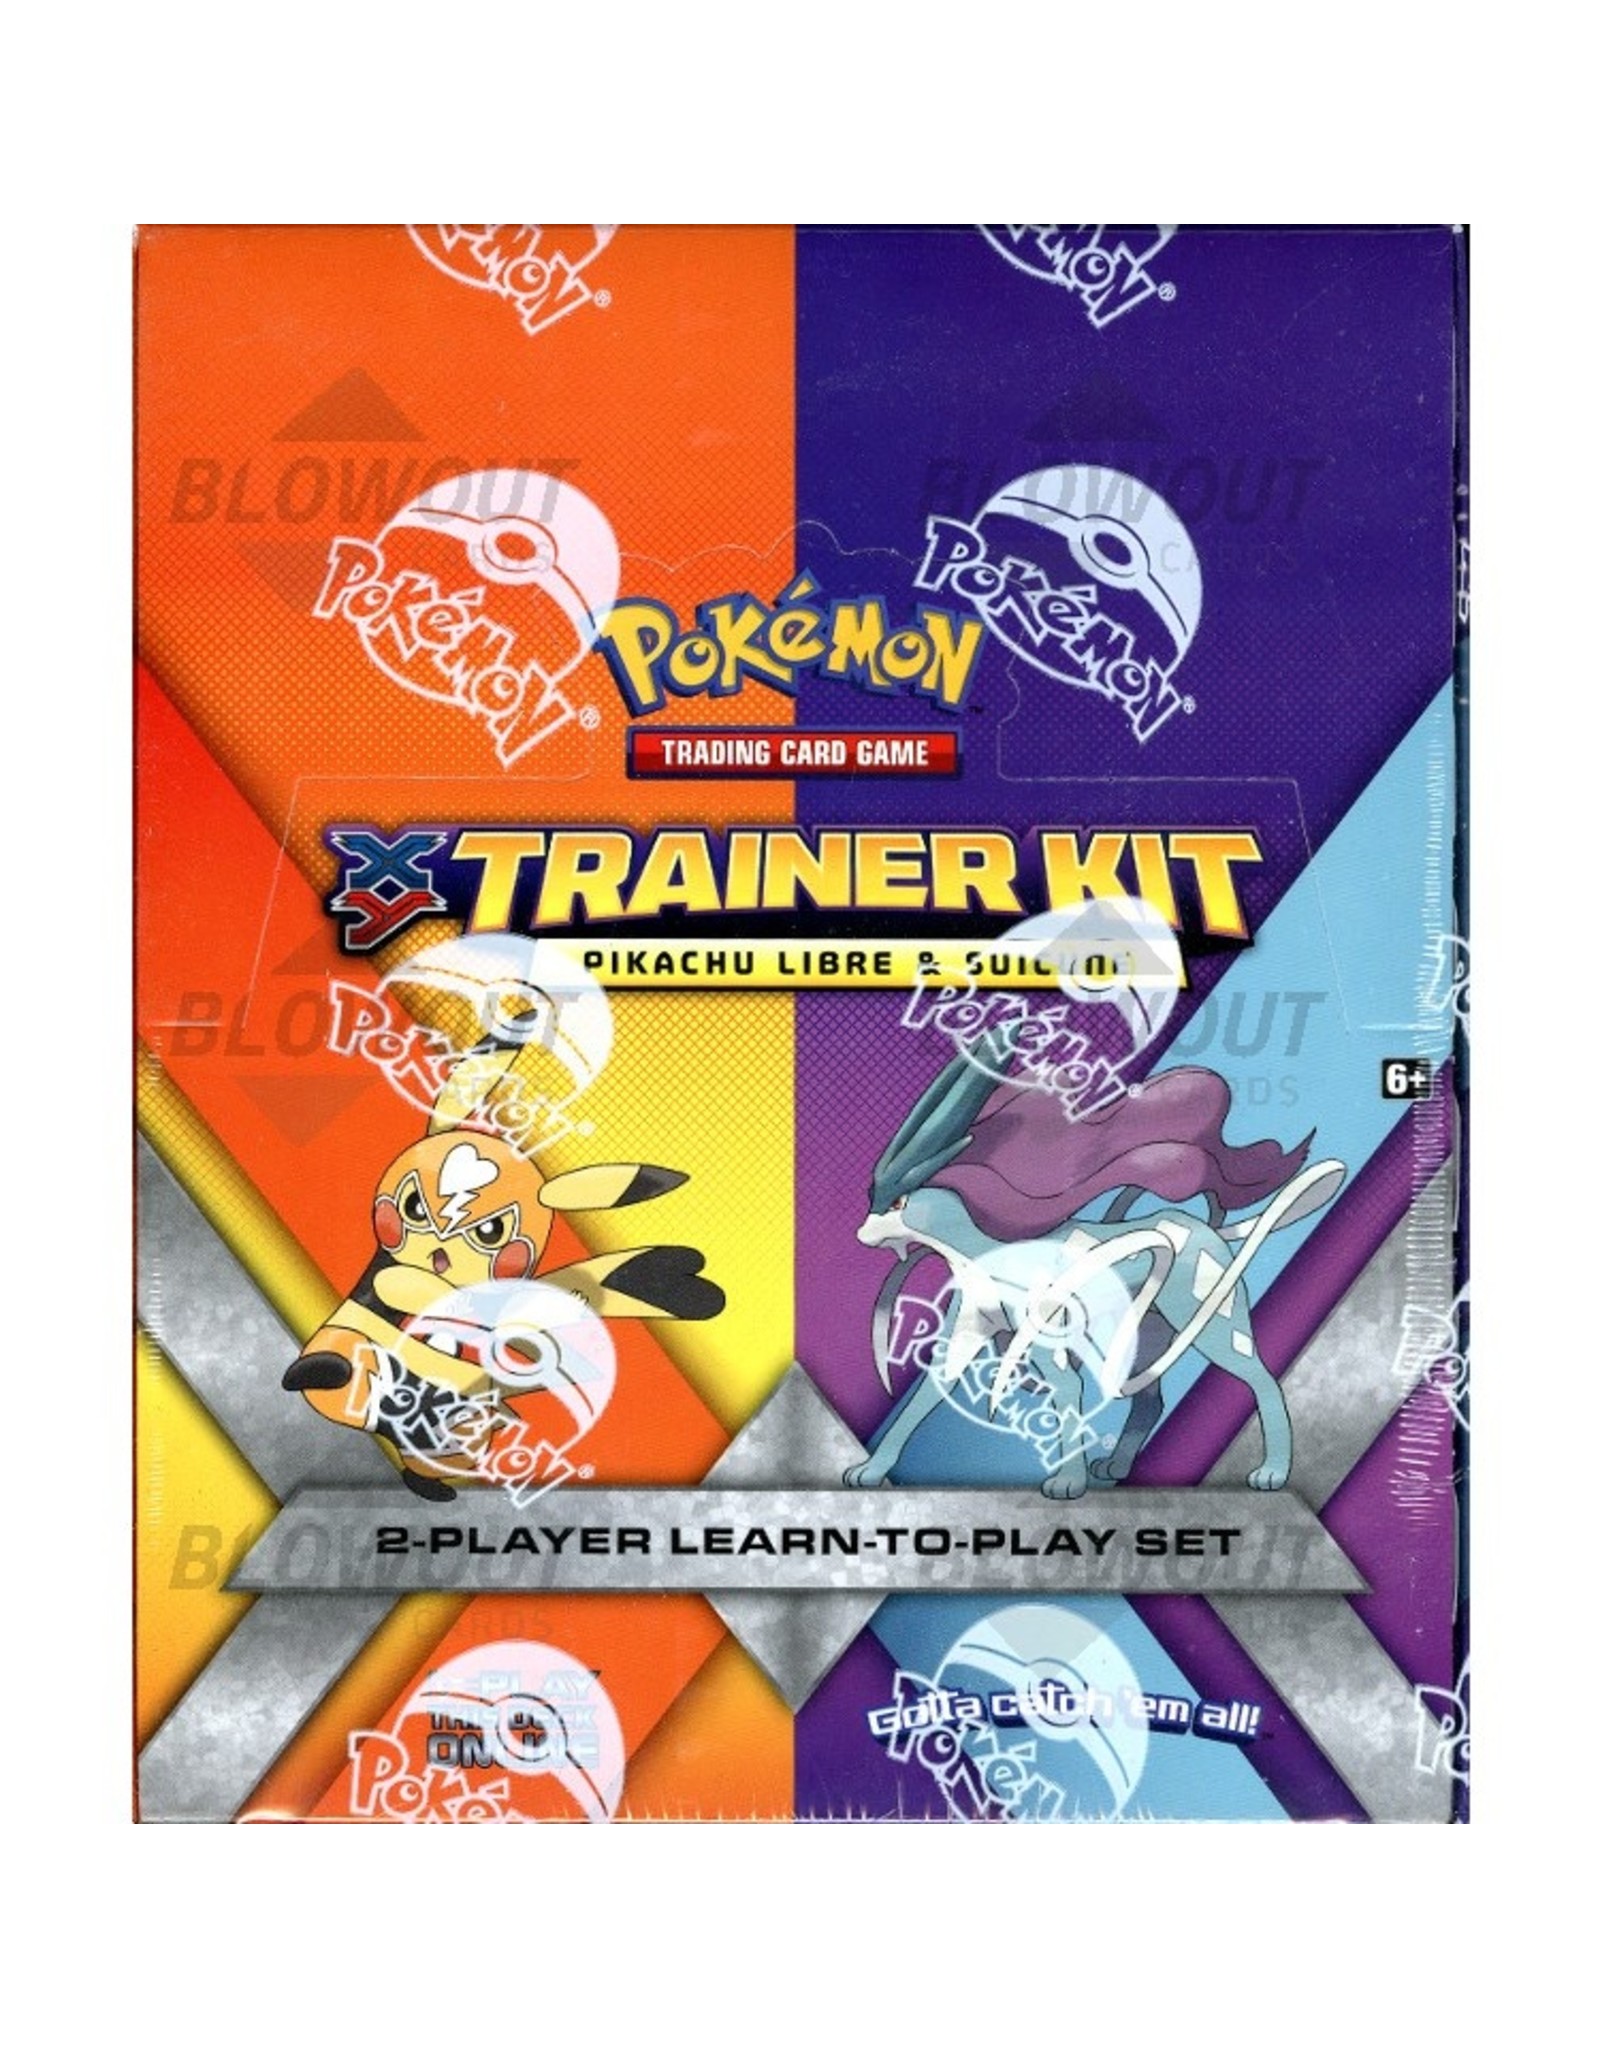 Pikachu Libre and Suicune 8 Trainer Kit Case